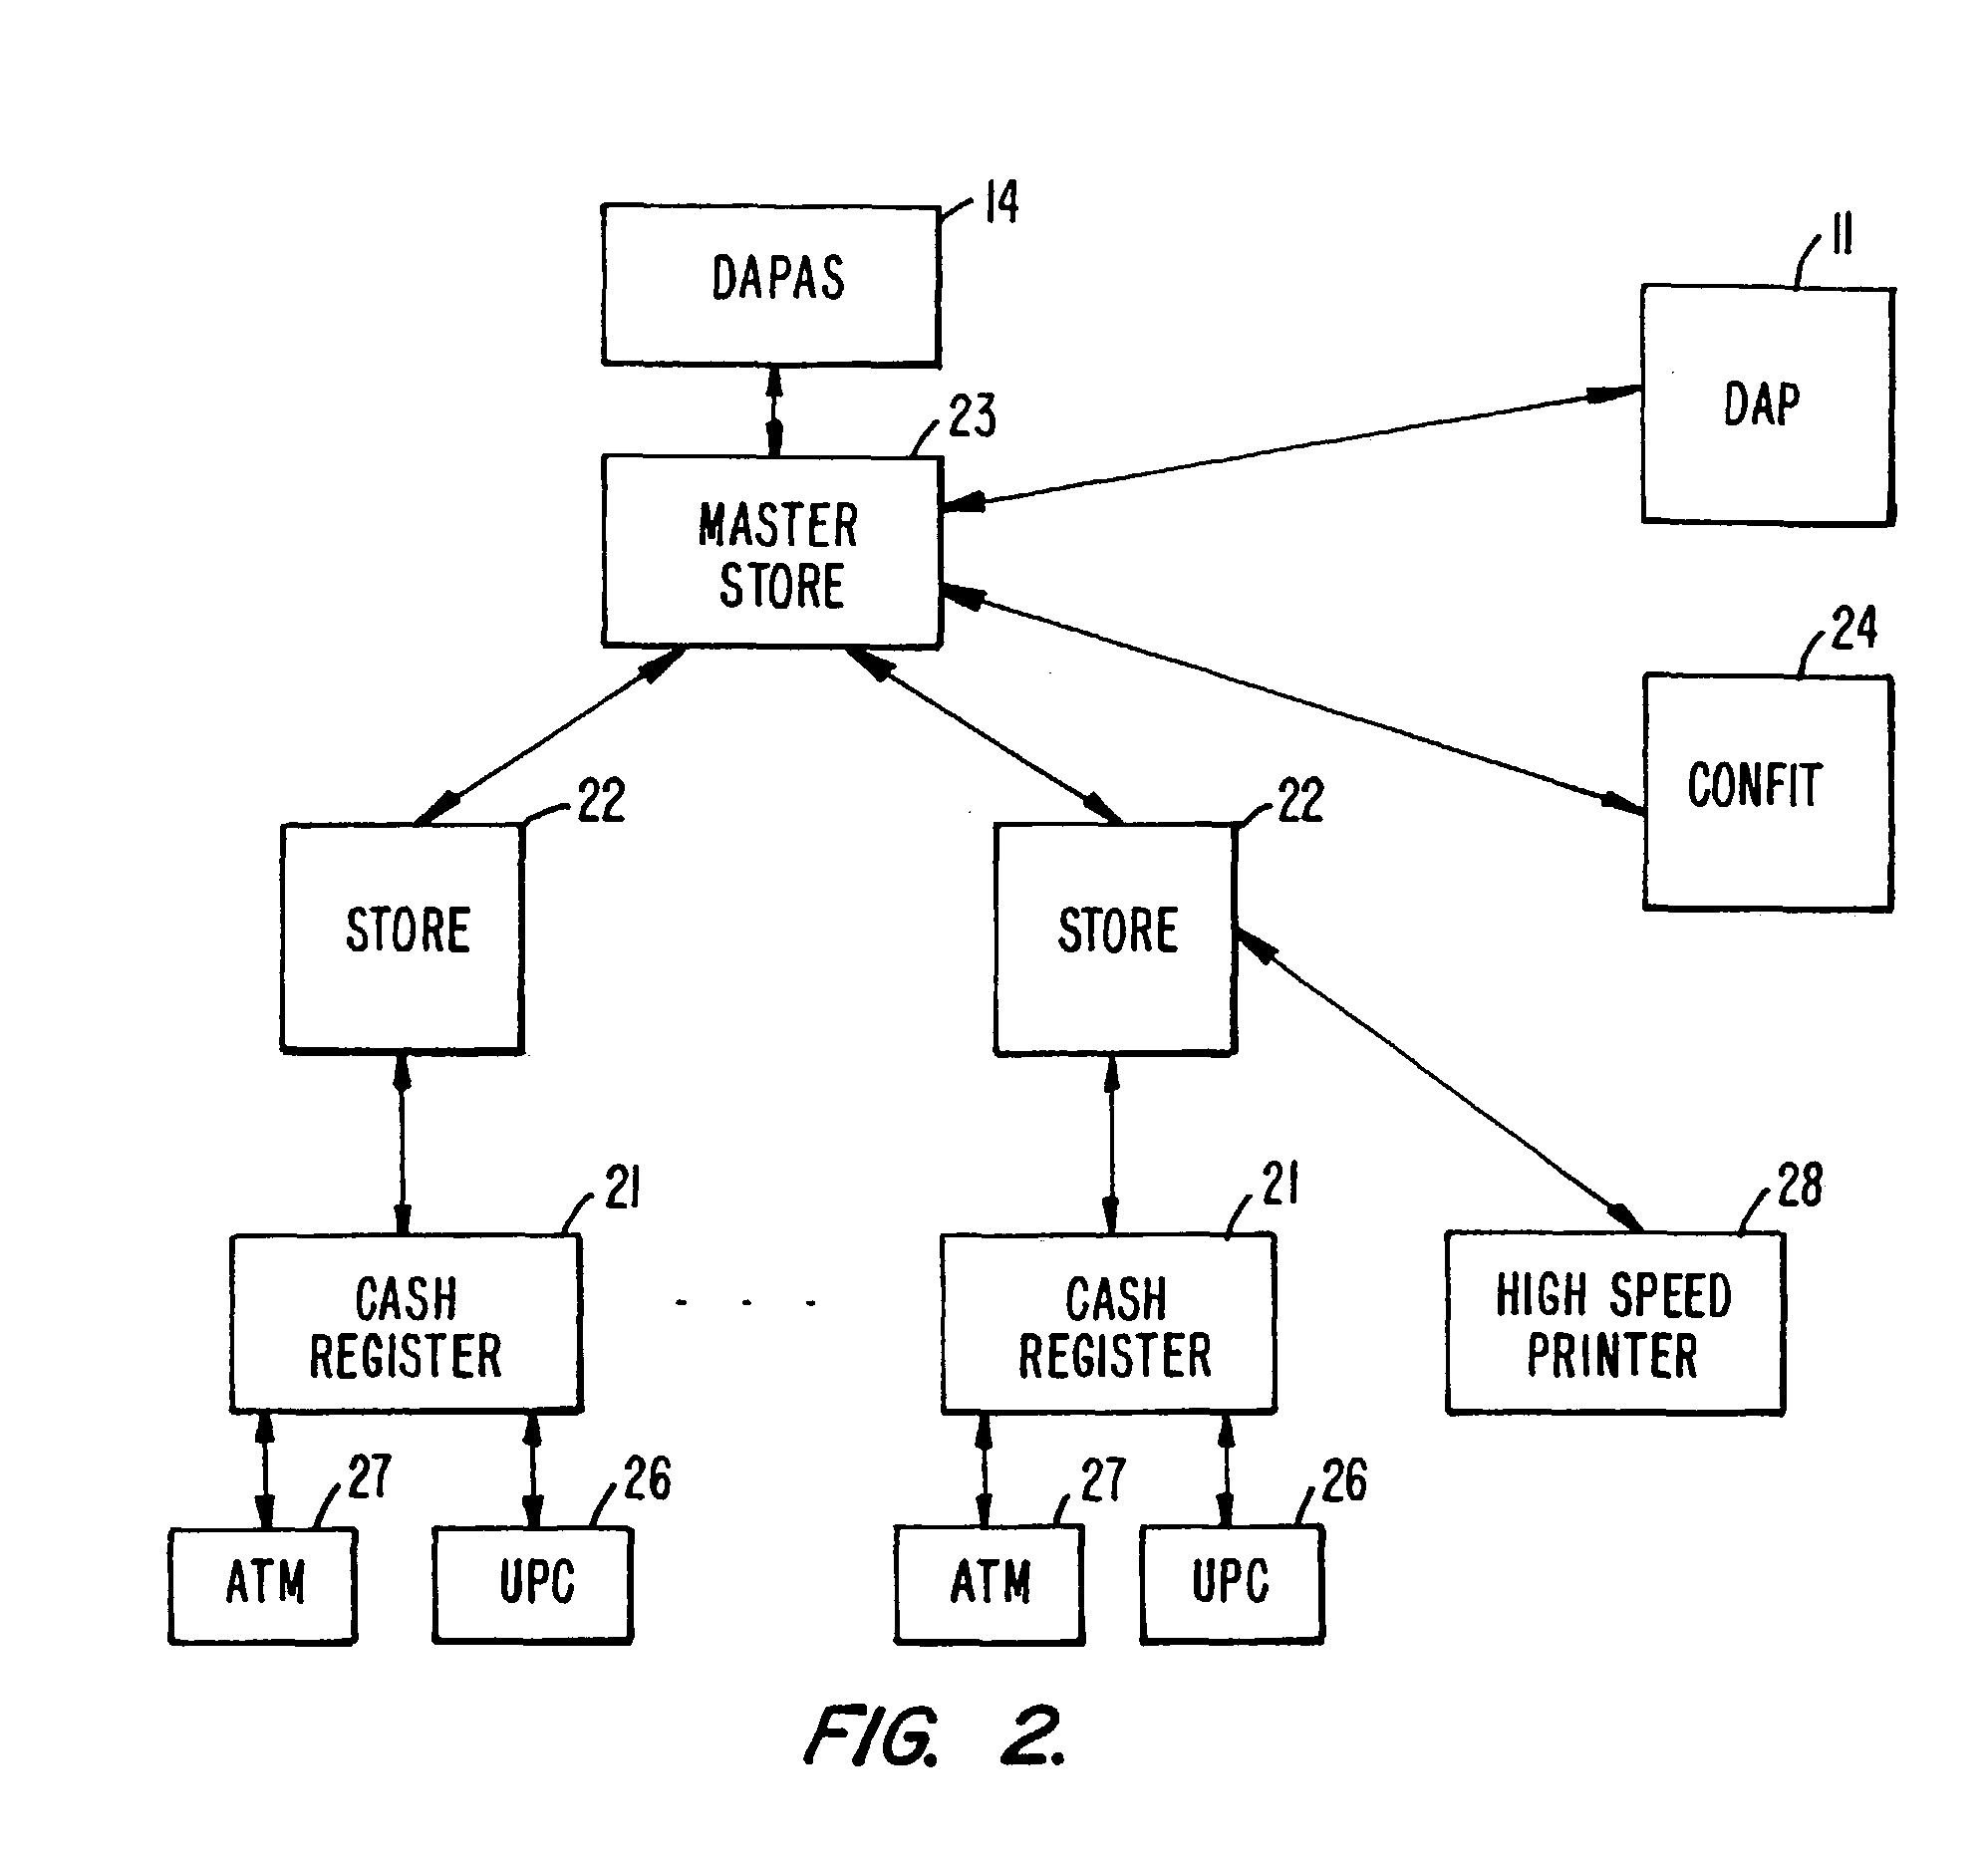 System and method for inverted promotions